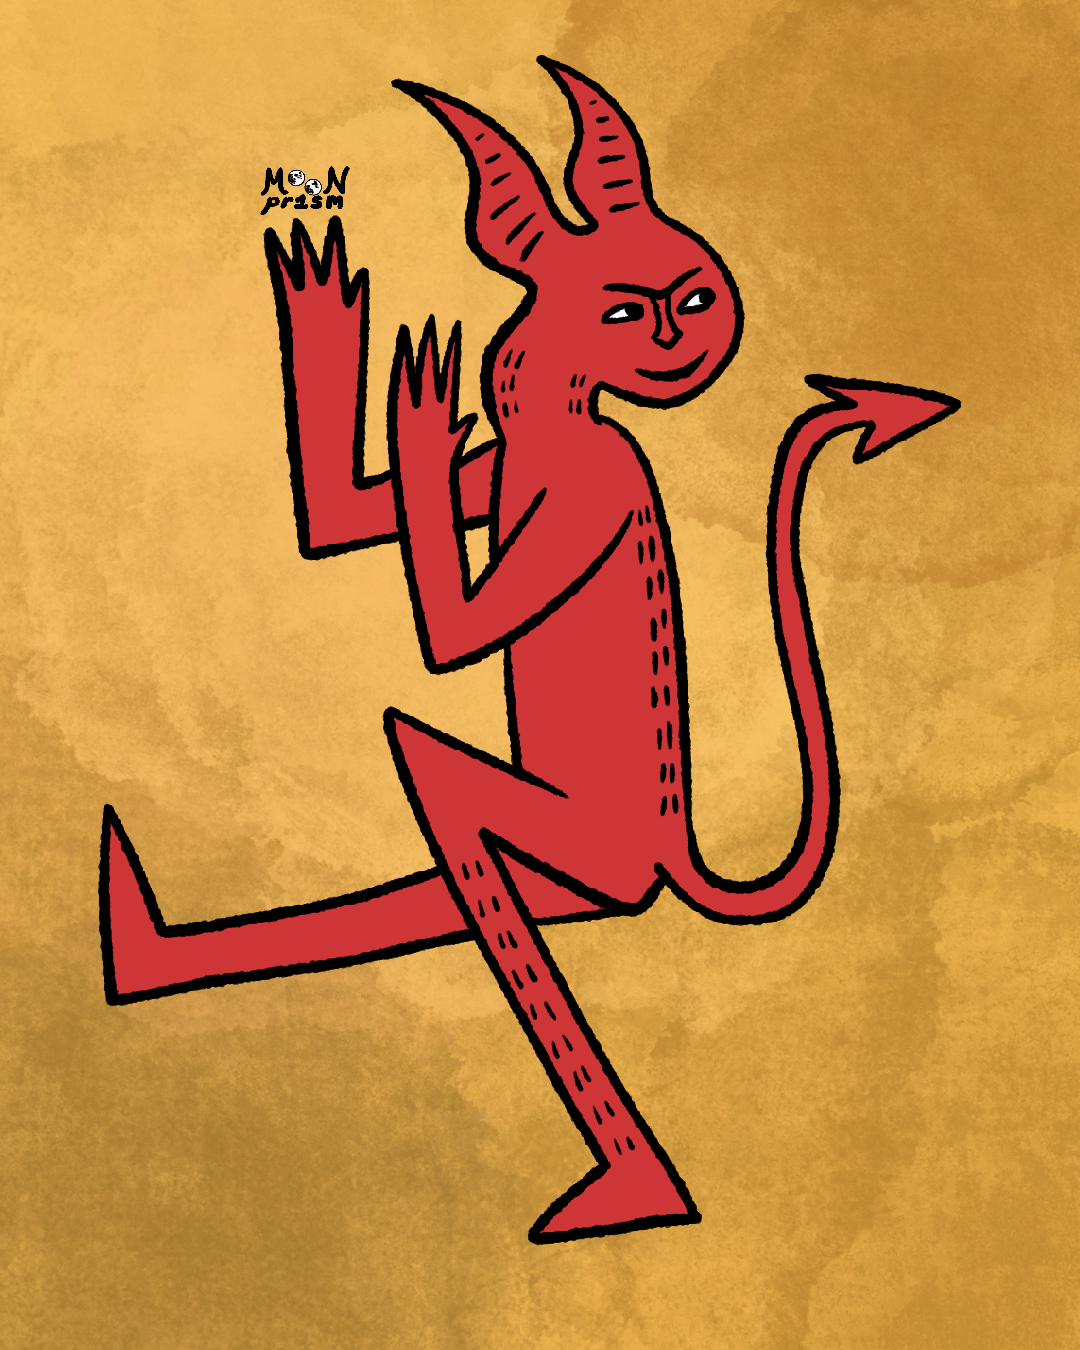 a medieval era inspired illustration of a red devil character with a cheeky expression. He seems up to no good!